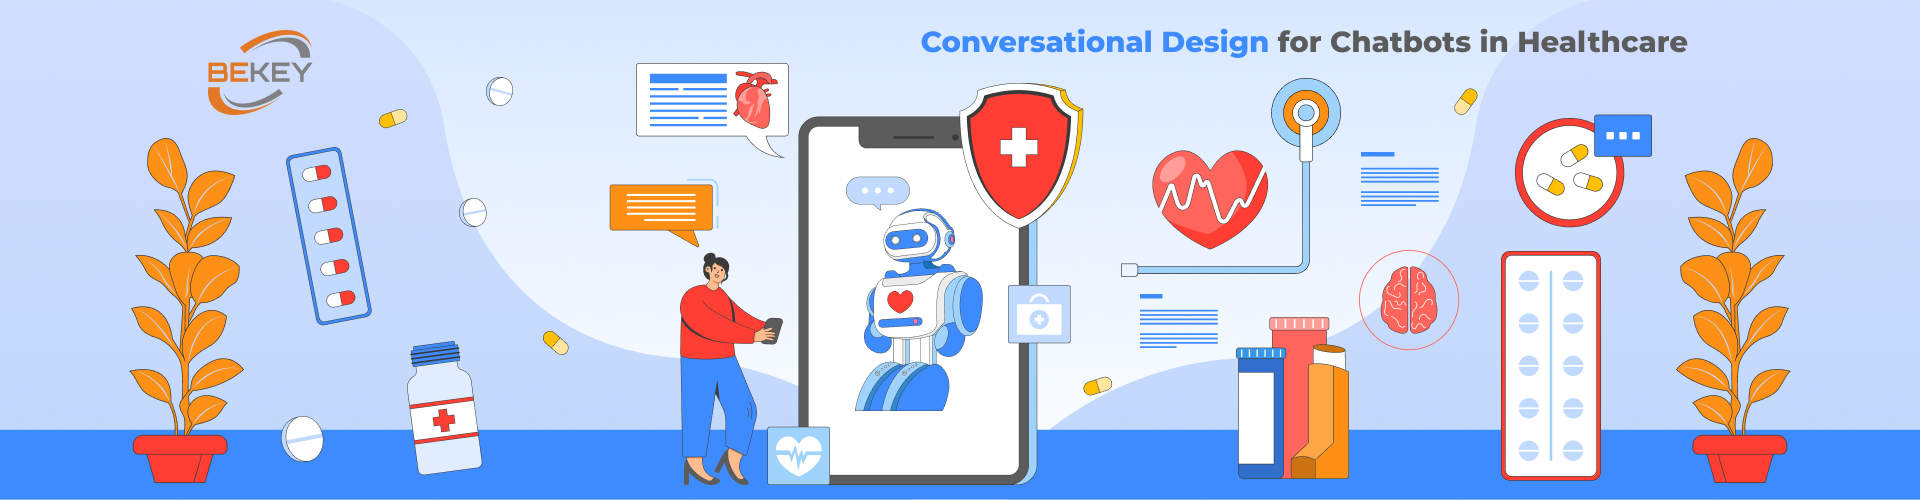 Conversational design for chatbots in healthcare